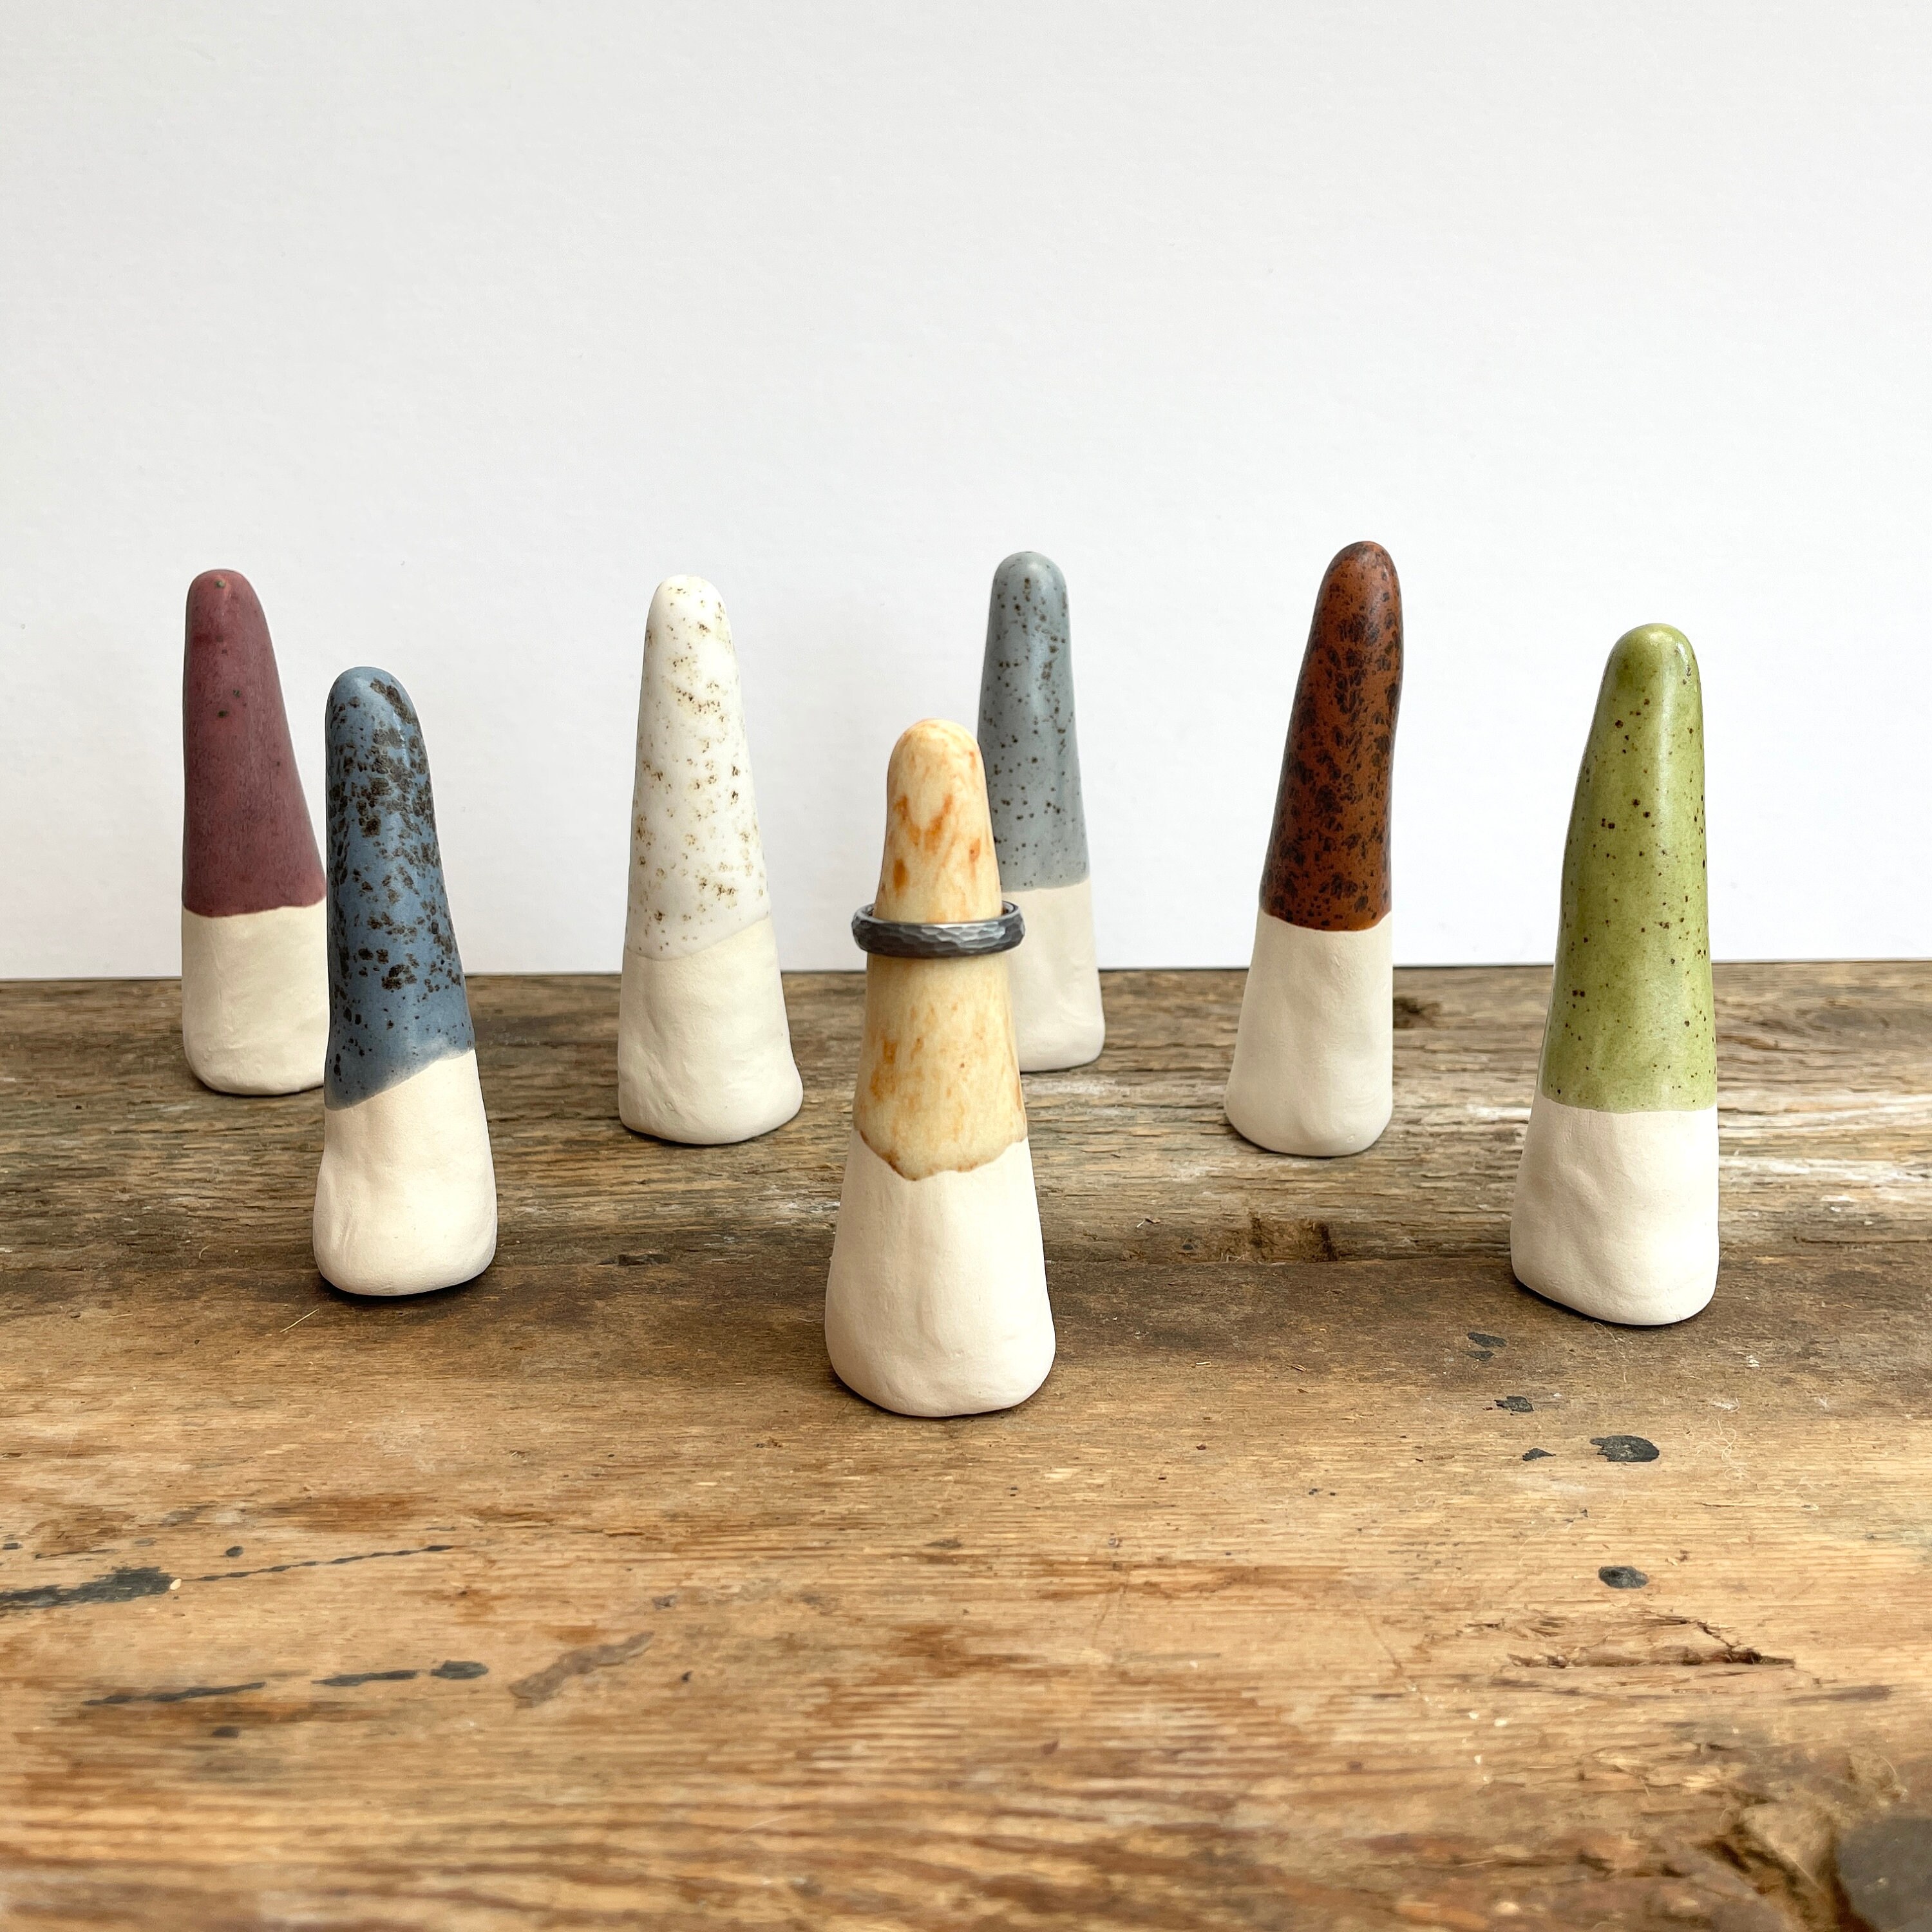 Hand-Sculpted Ceramic Ring Holder. Handmade Cones With A Dip Glazed Finish. Decorative Tree